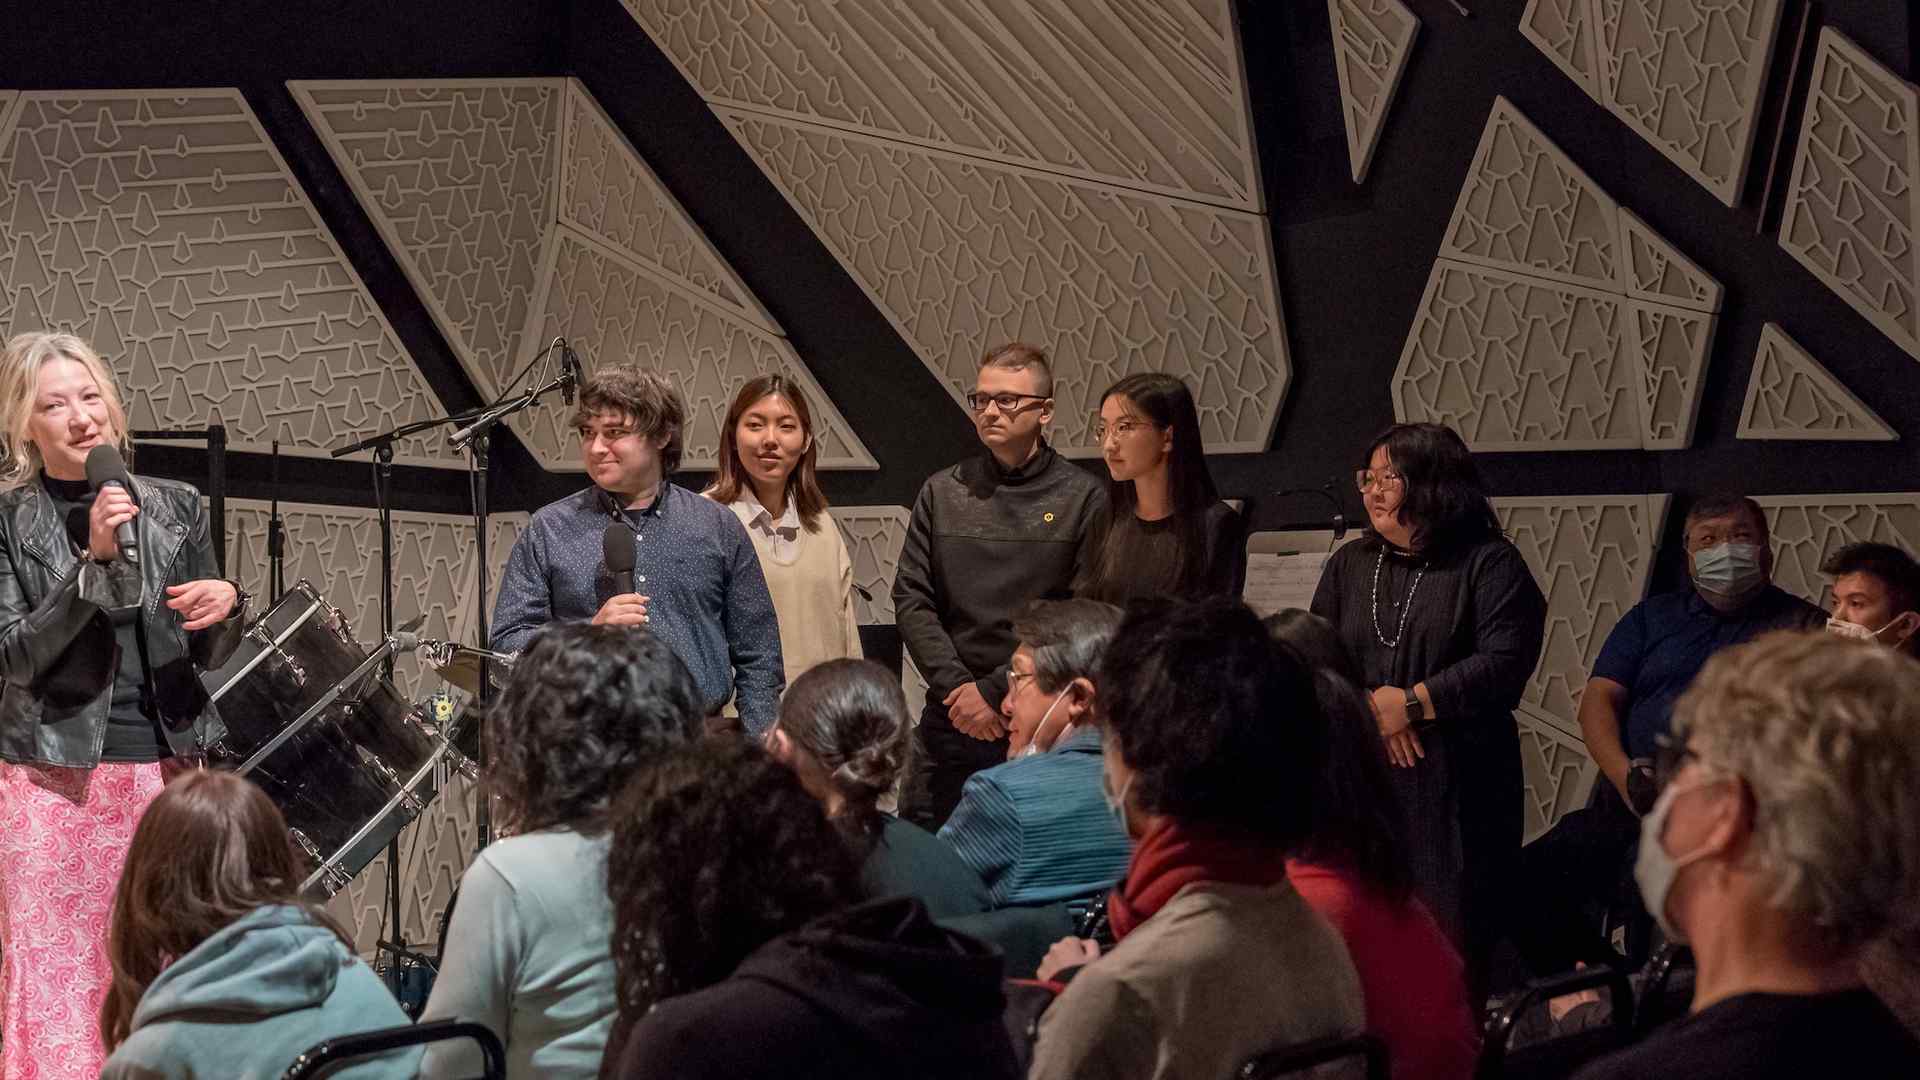 Amy Beth Kirsten, Aidan Gold, SiHyun, Sia Uhm, Eugene Astapov, Lingobo Ma, Nicole Balsirow at the December Blueprint concert. They are all standing on stage and Amy Beth Kirsten, at far left, is speaking into a microphone.